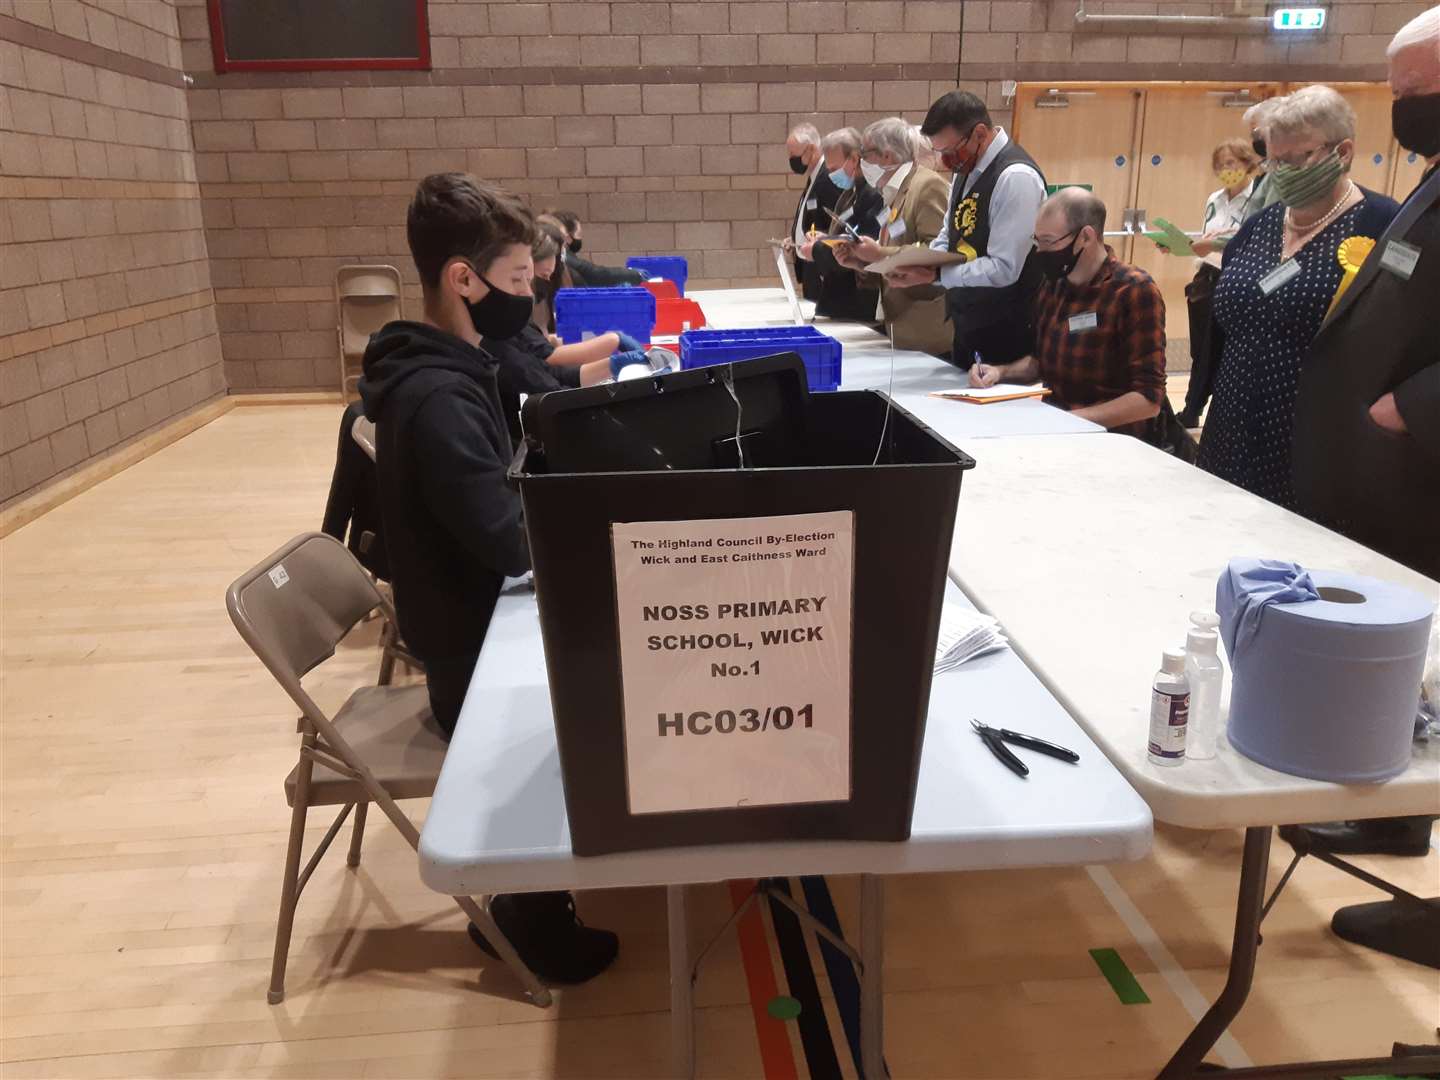 Counting for a by-election for a Wick seat took place in Inverness. A full council election takes place in May.